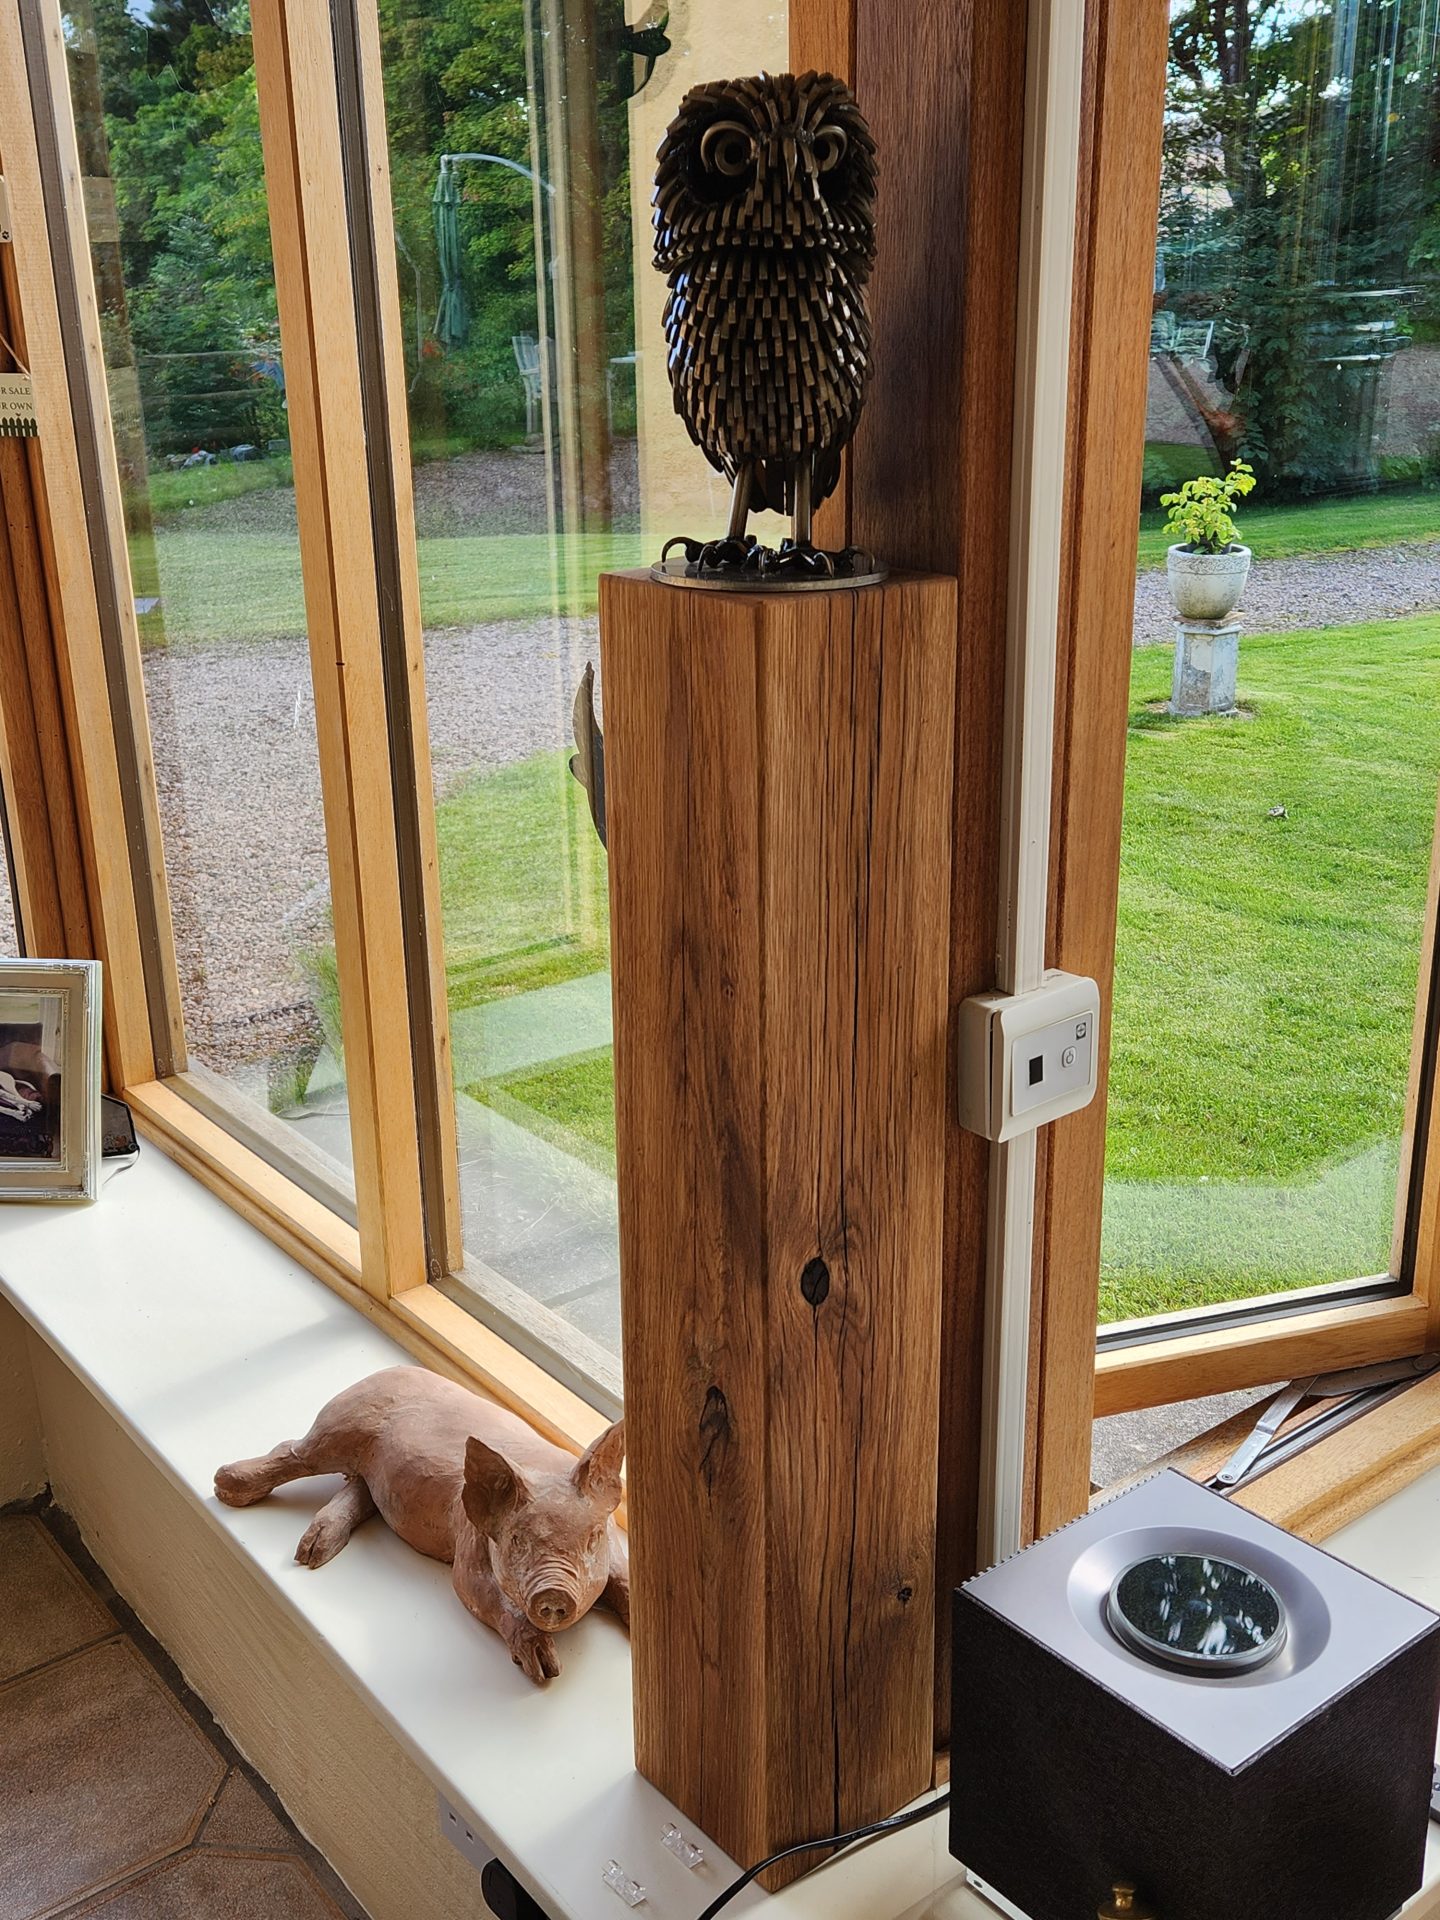 Owl Carving From Lamp Stand